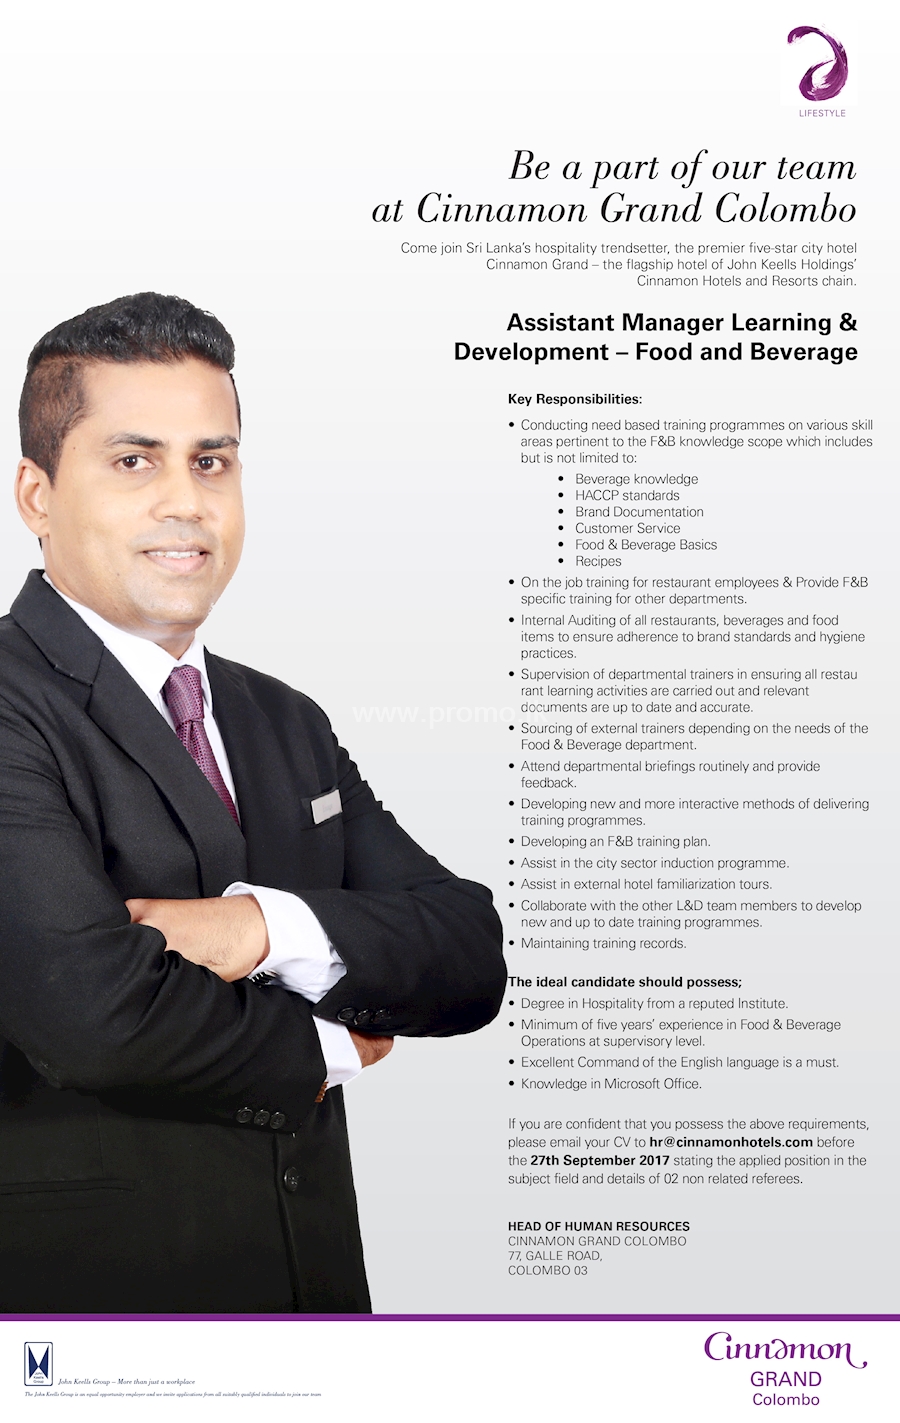 Assistant Manager Learning & Development   Food & Beverage at ...